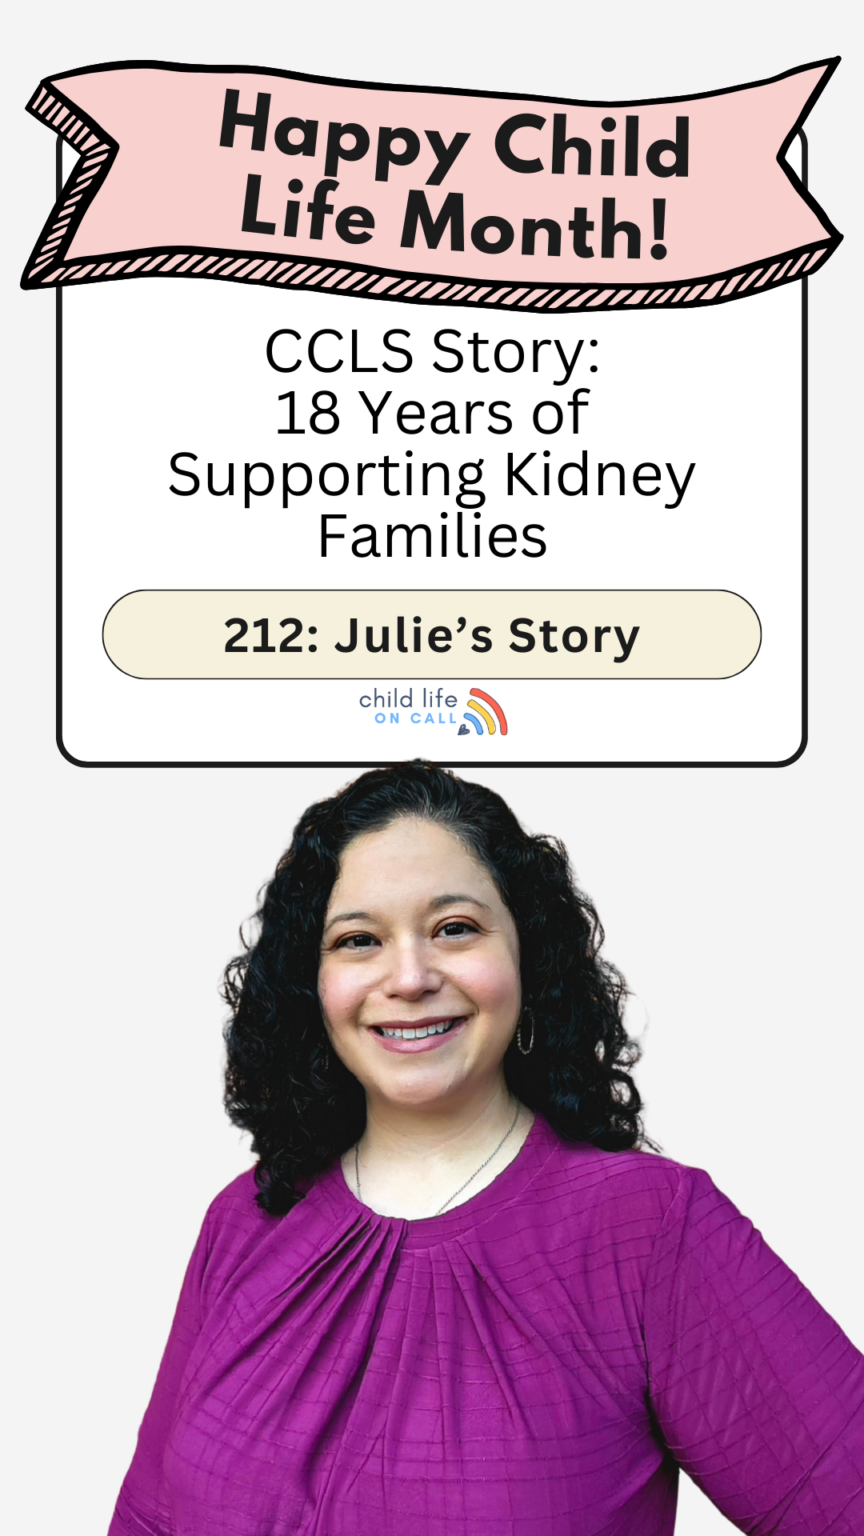 Words: Happy Child Life Month CCLS Story: 18 years of supporting kidney families and a picture of a woman in a purple top.